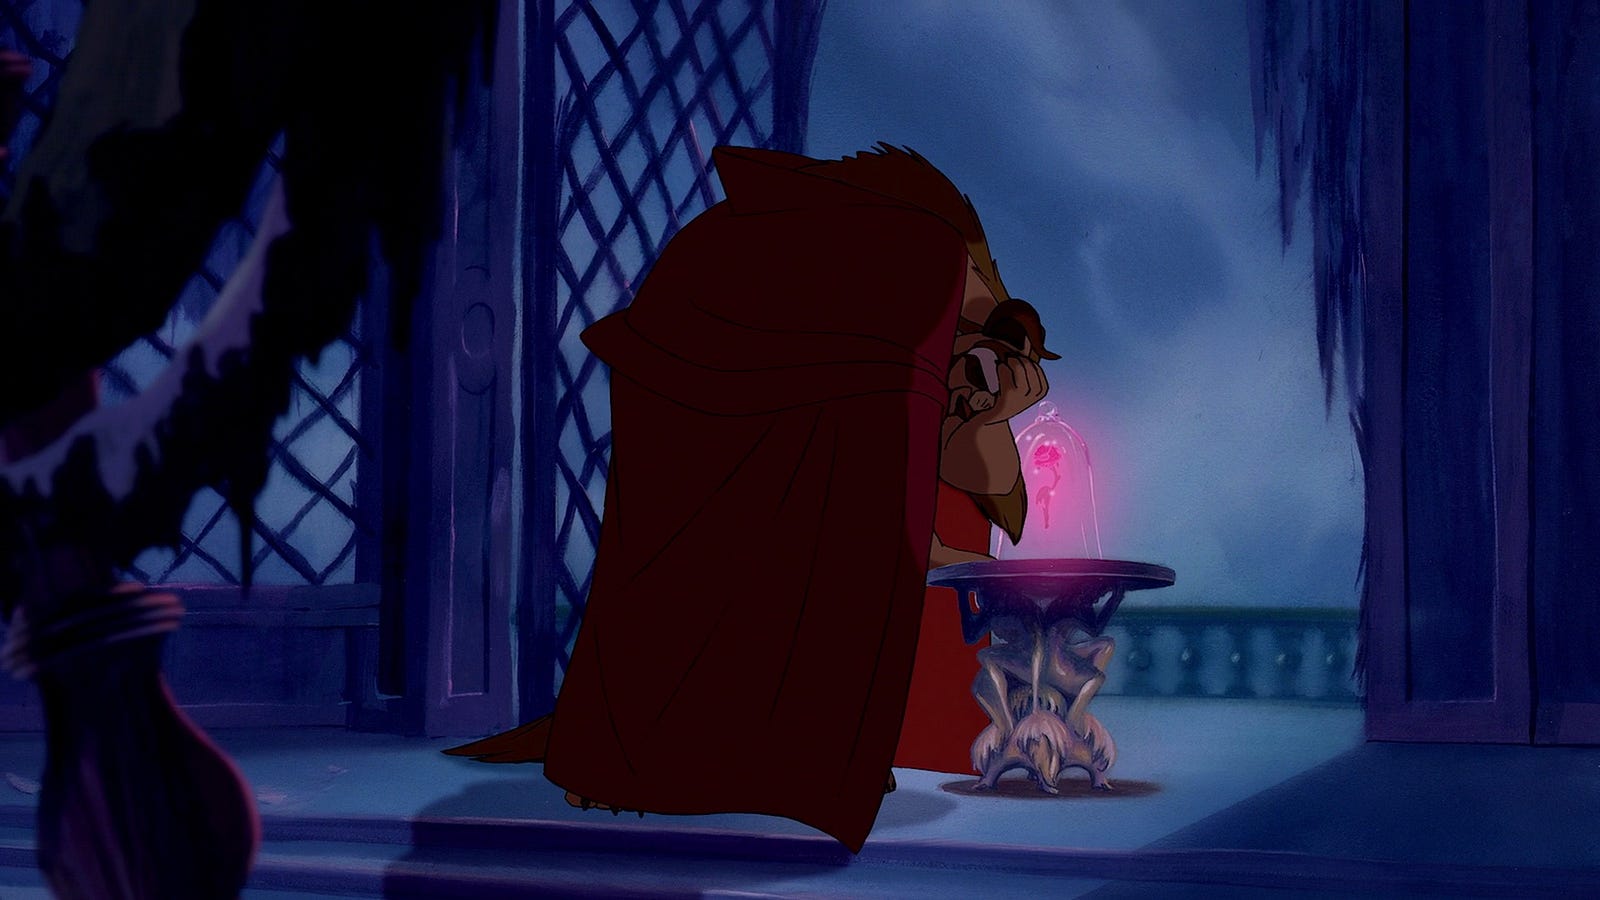 The Beast and his enchanted rose in Disney’s Beauty and the Beast (1991).